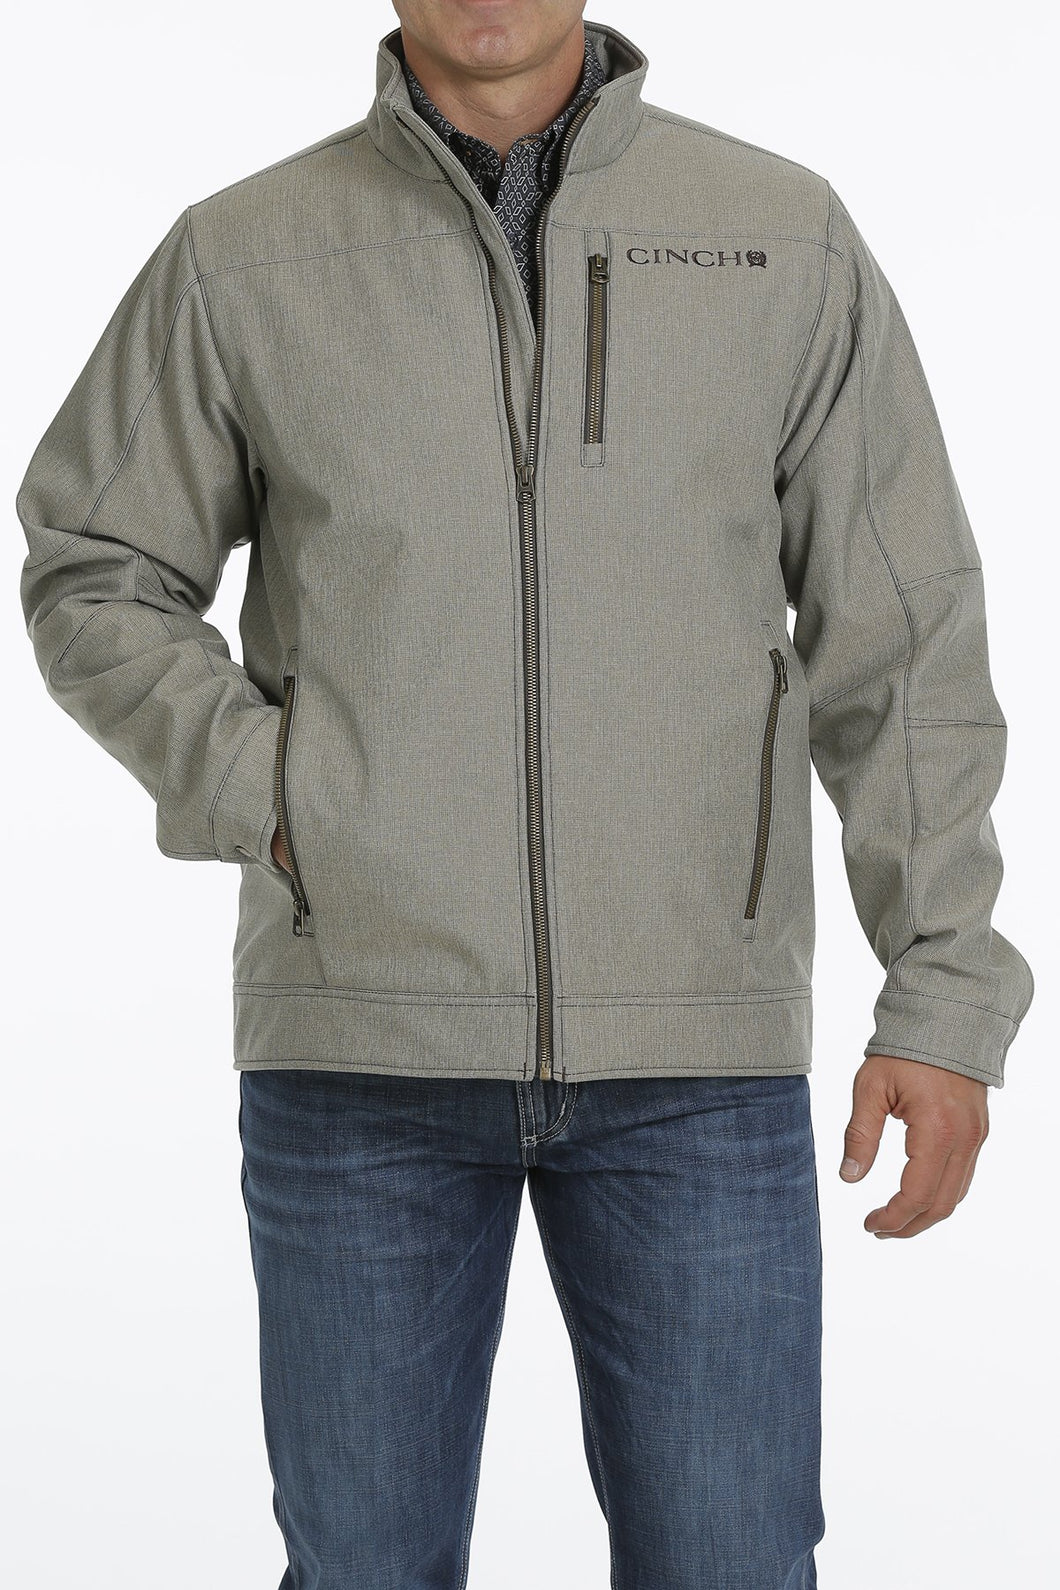 MEN'S CONCEALED CARRY JACKET - TEXTURED GRAY